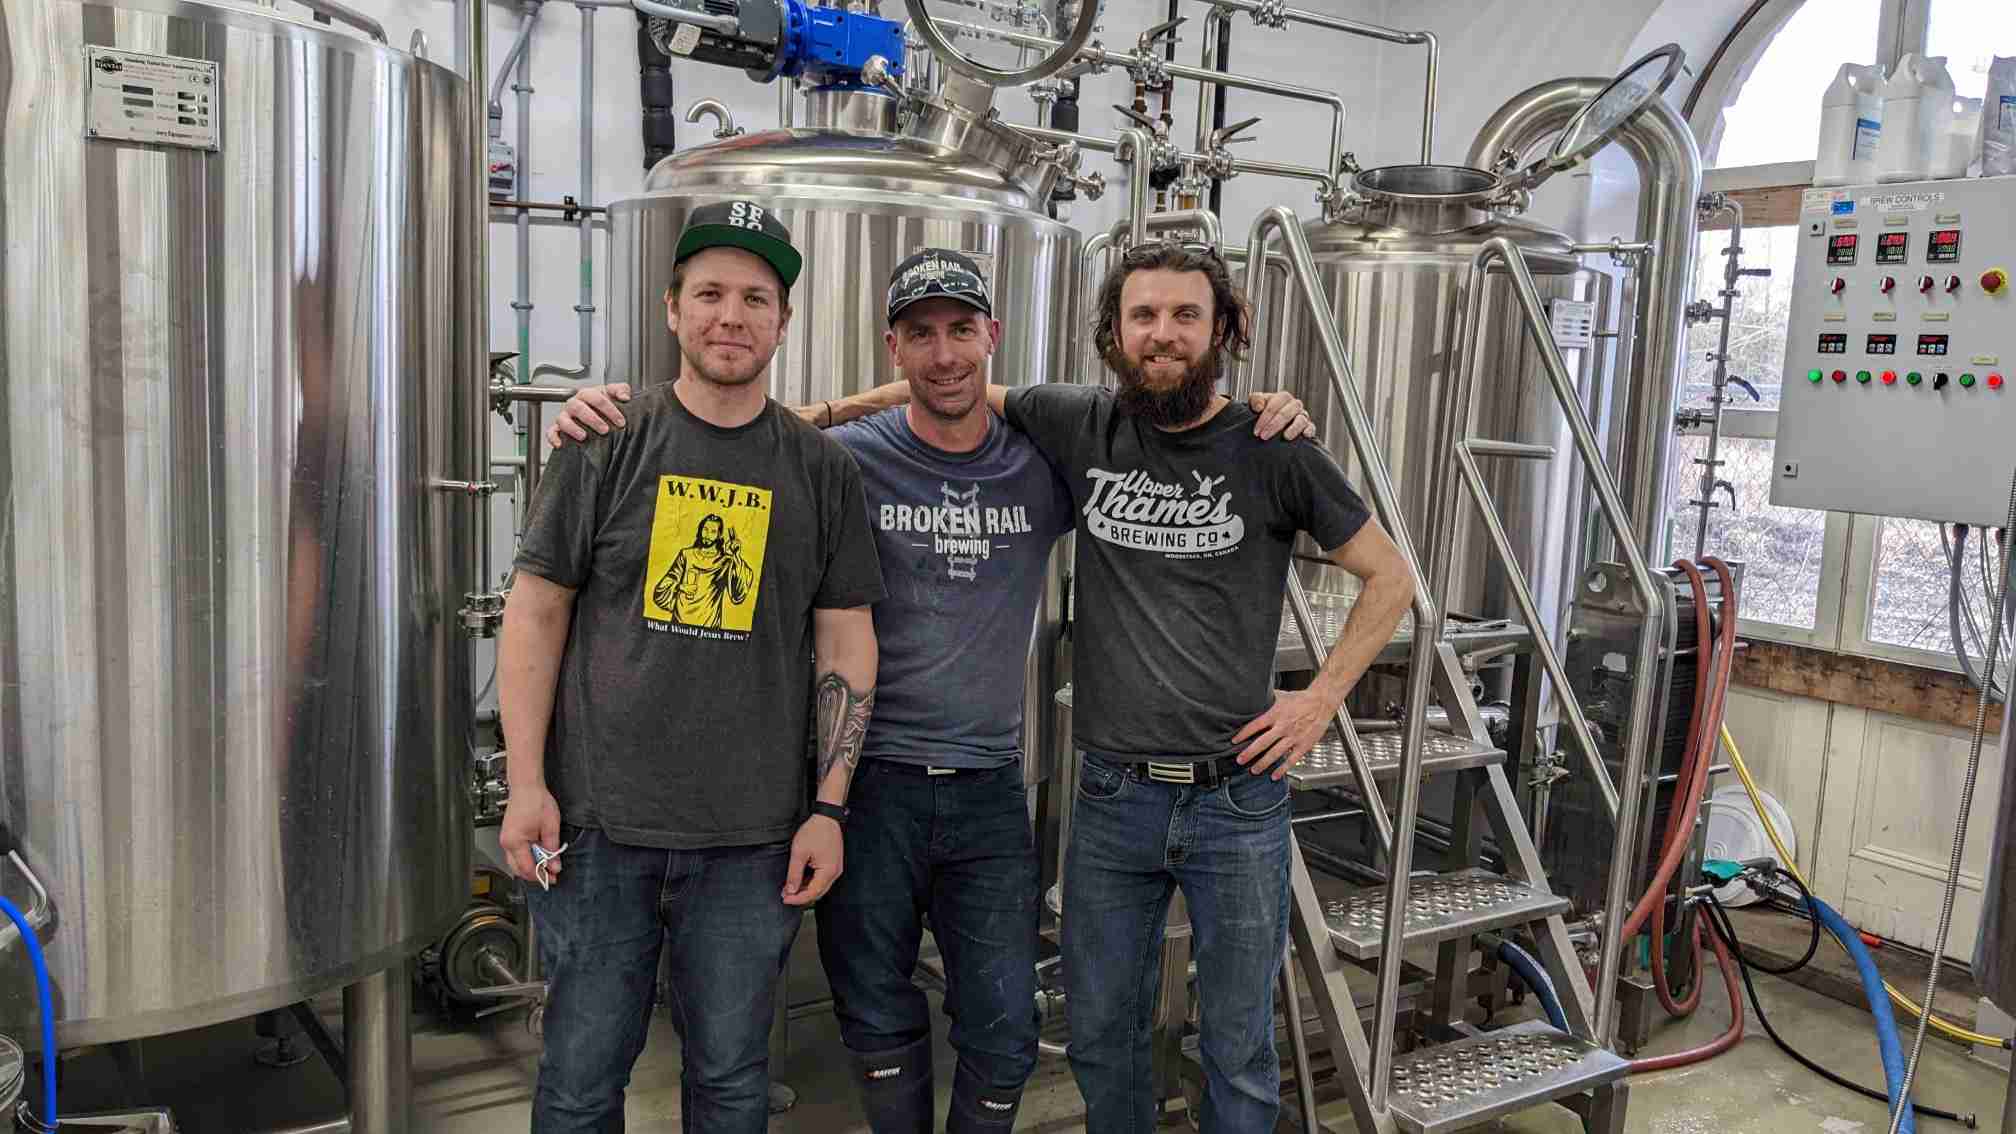 Broken Rail Brewing Co. In Canada - 5bbl brewery equipment by TIANTAI